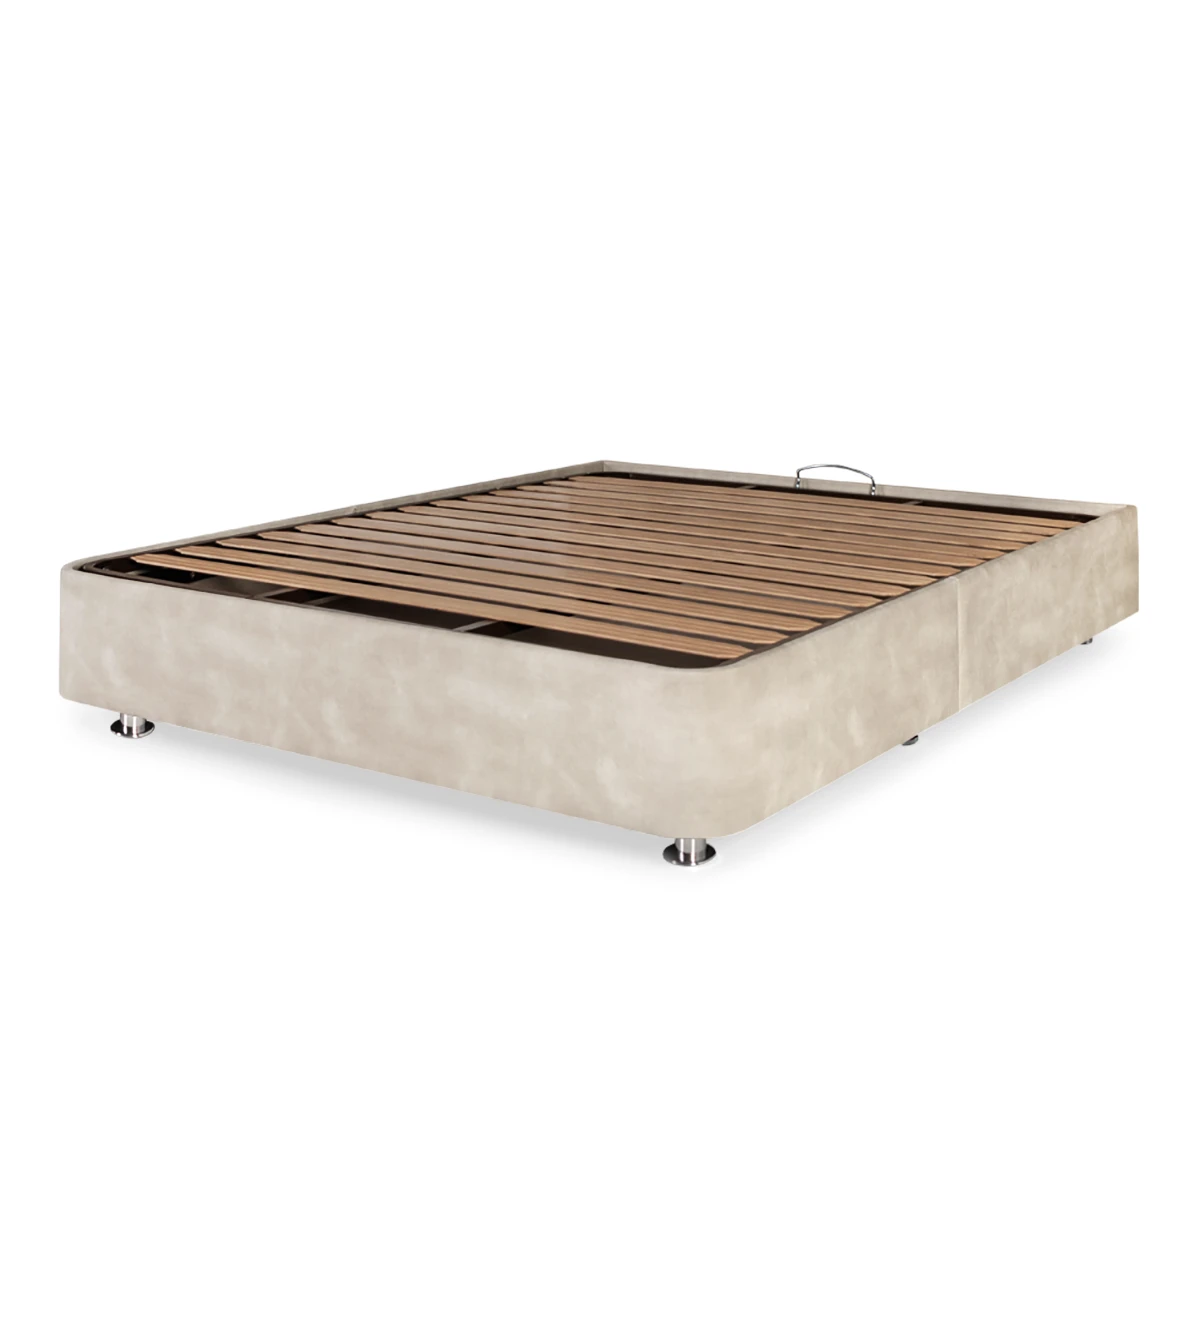 Double sommier upholstered in fabric, with lift-up bed for storage.